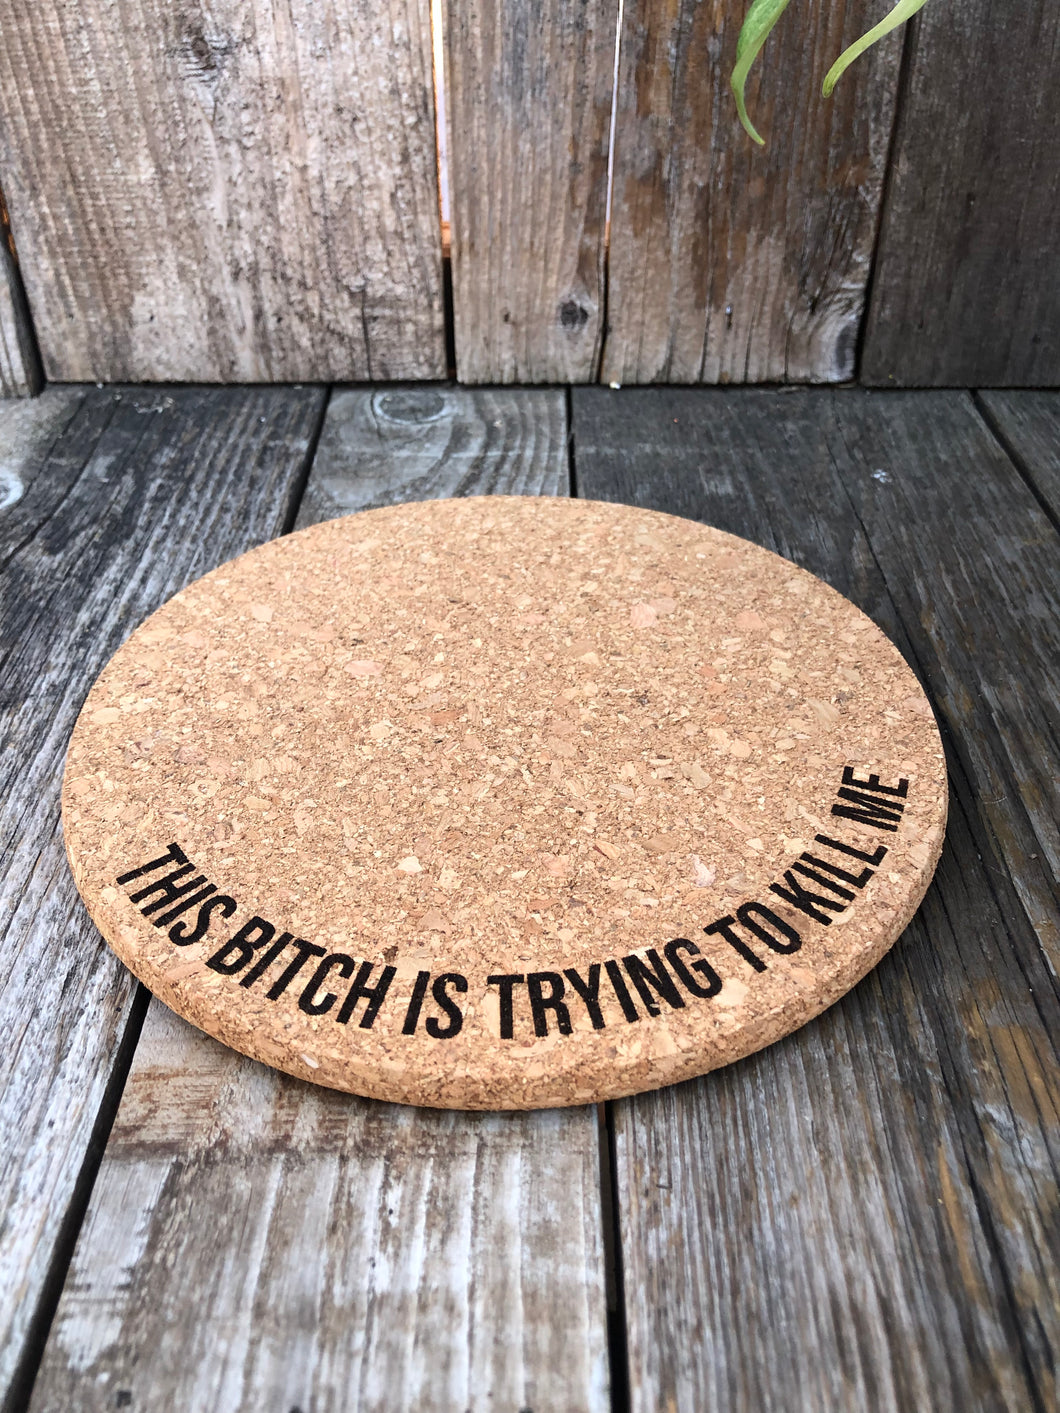 This Bitch is Trying to Kill Me Cork Plant Mat - Engraved Cork Round - Cork Bottom - No Plastic or Rubber - All Natural Material